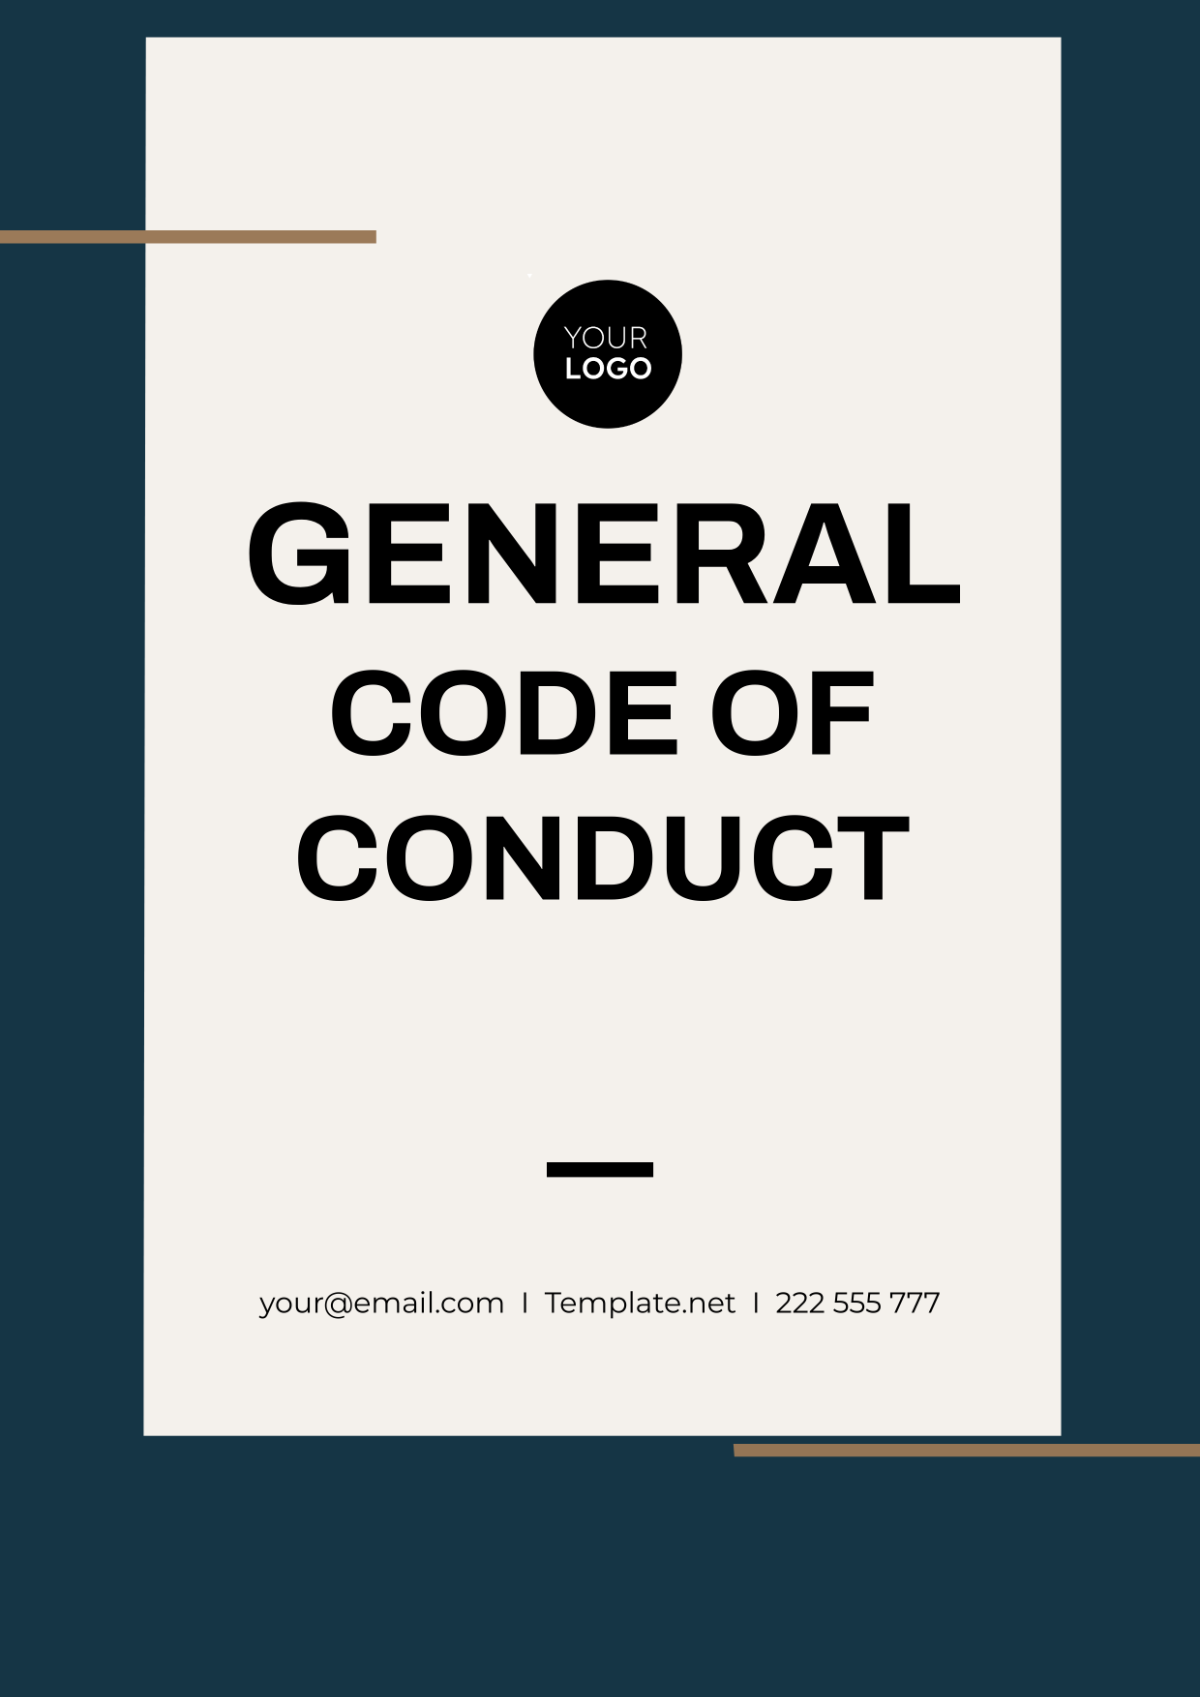 General Code of Conduct Template